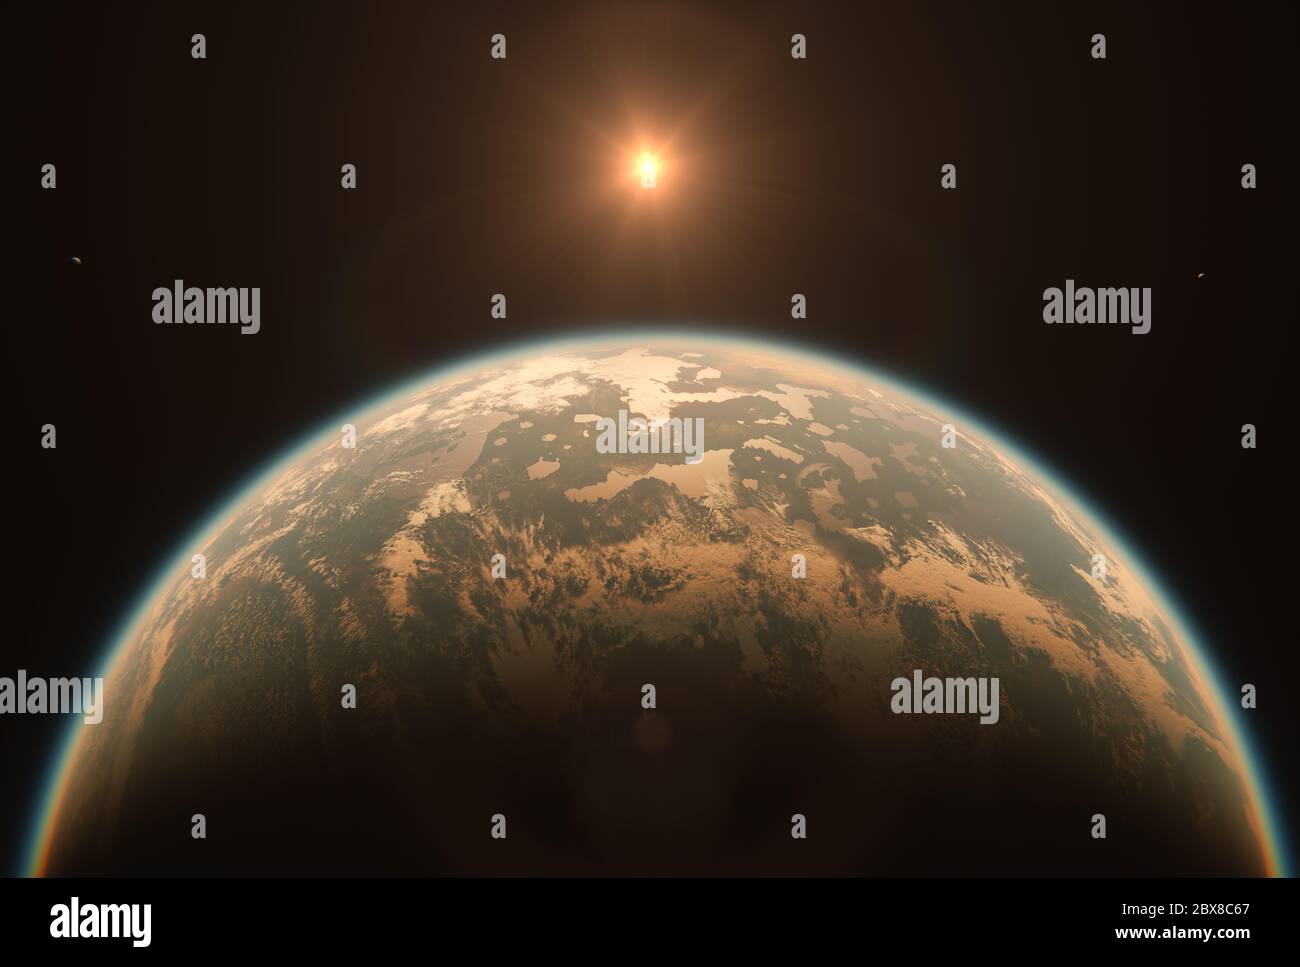 Horizon Landscape of Habitable Earth Like Planet with Two Moons and Sun in Space - Livable Exoplanet with Dual Moon Orbiting Red Dwarf System Stock Photo